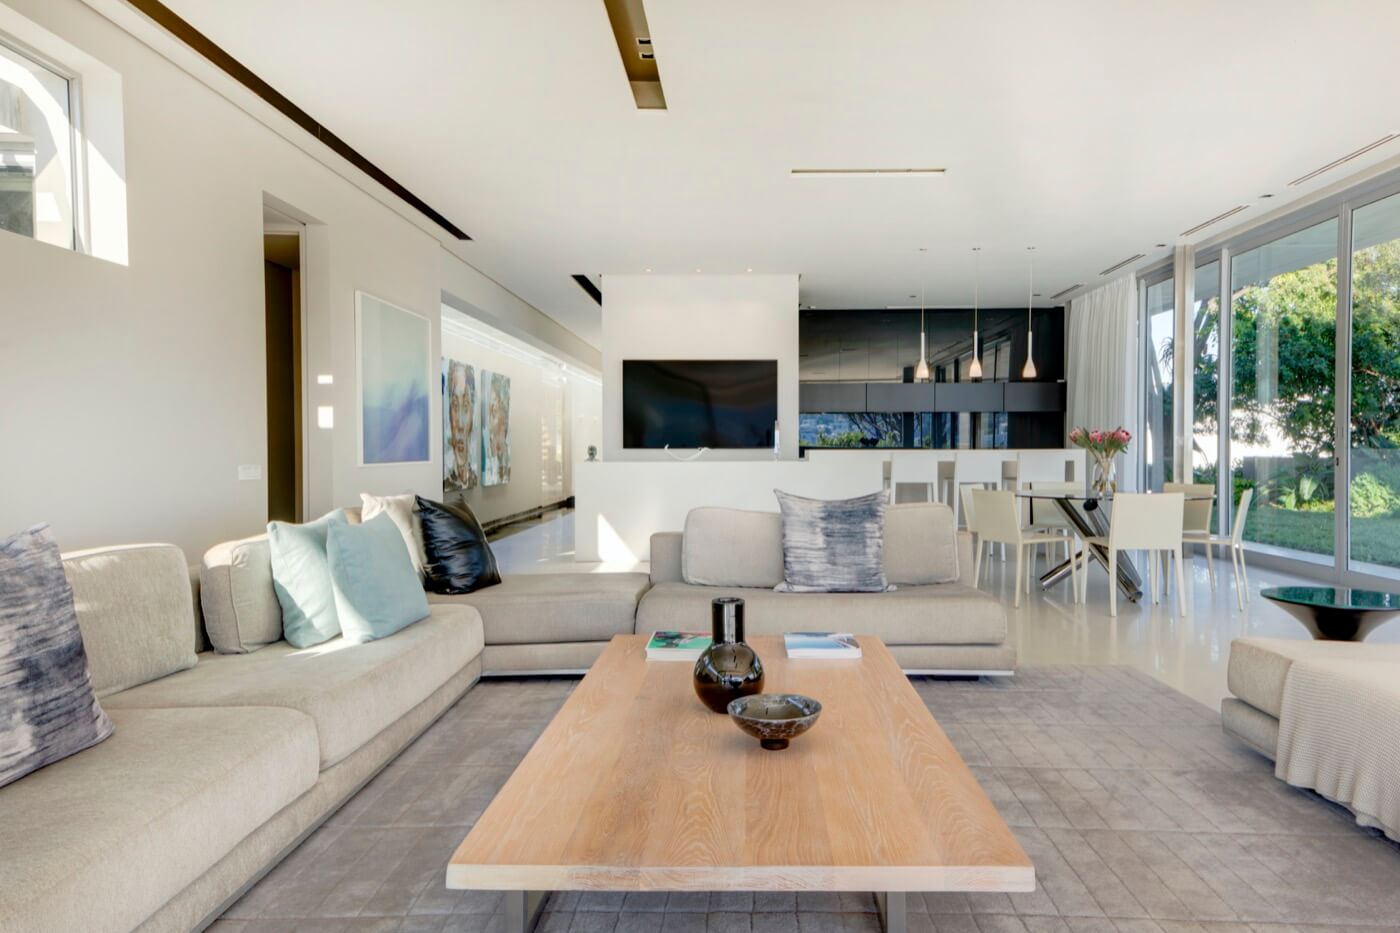 Photo 26 of The Crescent accommodation in Camps Bay, Cape Town with 6 bedrooms and 6.5 bathrooms